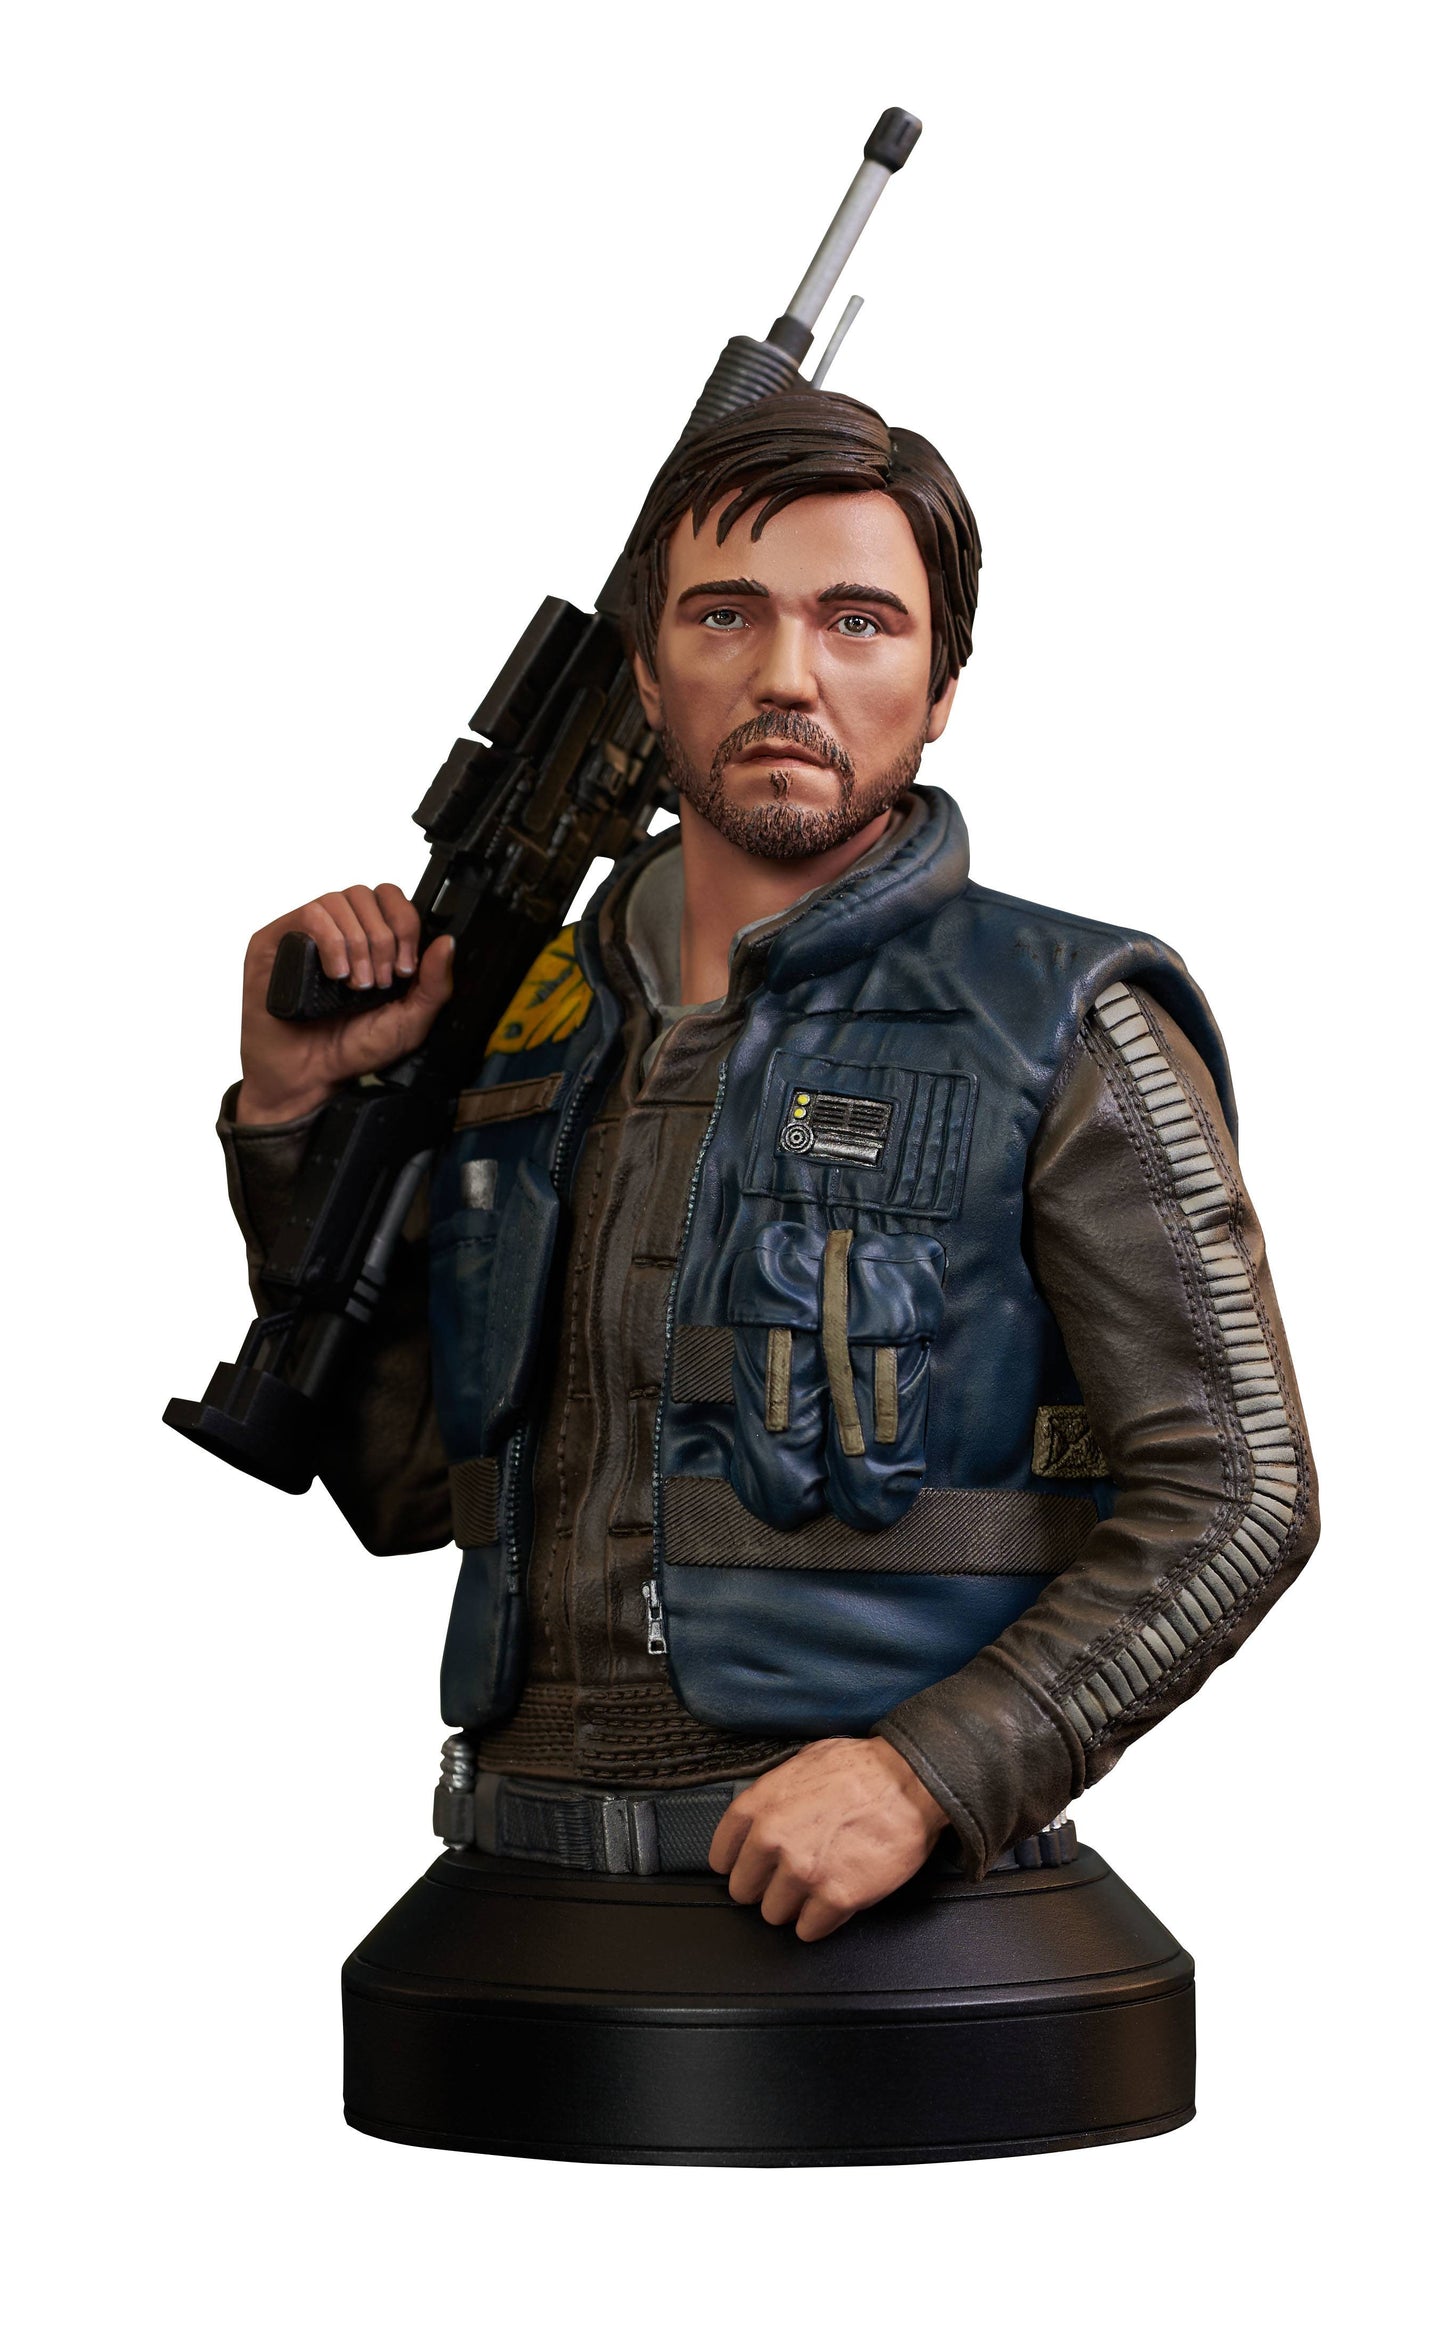 The One Stop Shop Comics & Games Star Wars Rogue One Cassian Andor 1/6 Scale Bust (C: 1-1-2) (10/26/2022) DIAMOND SELECT TOYS LLC